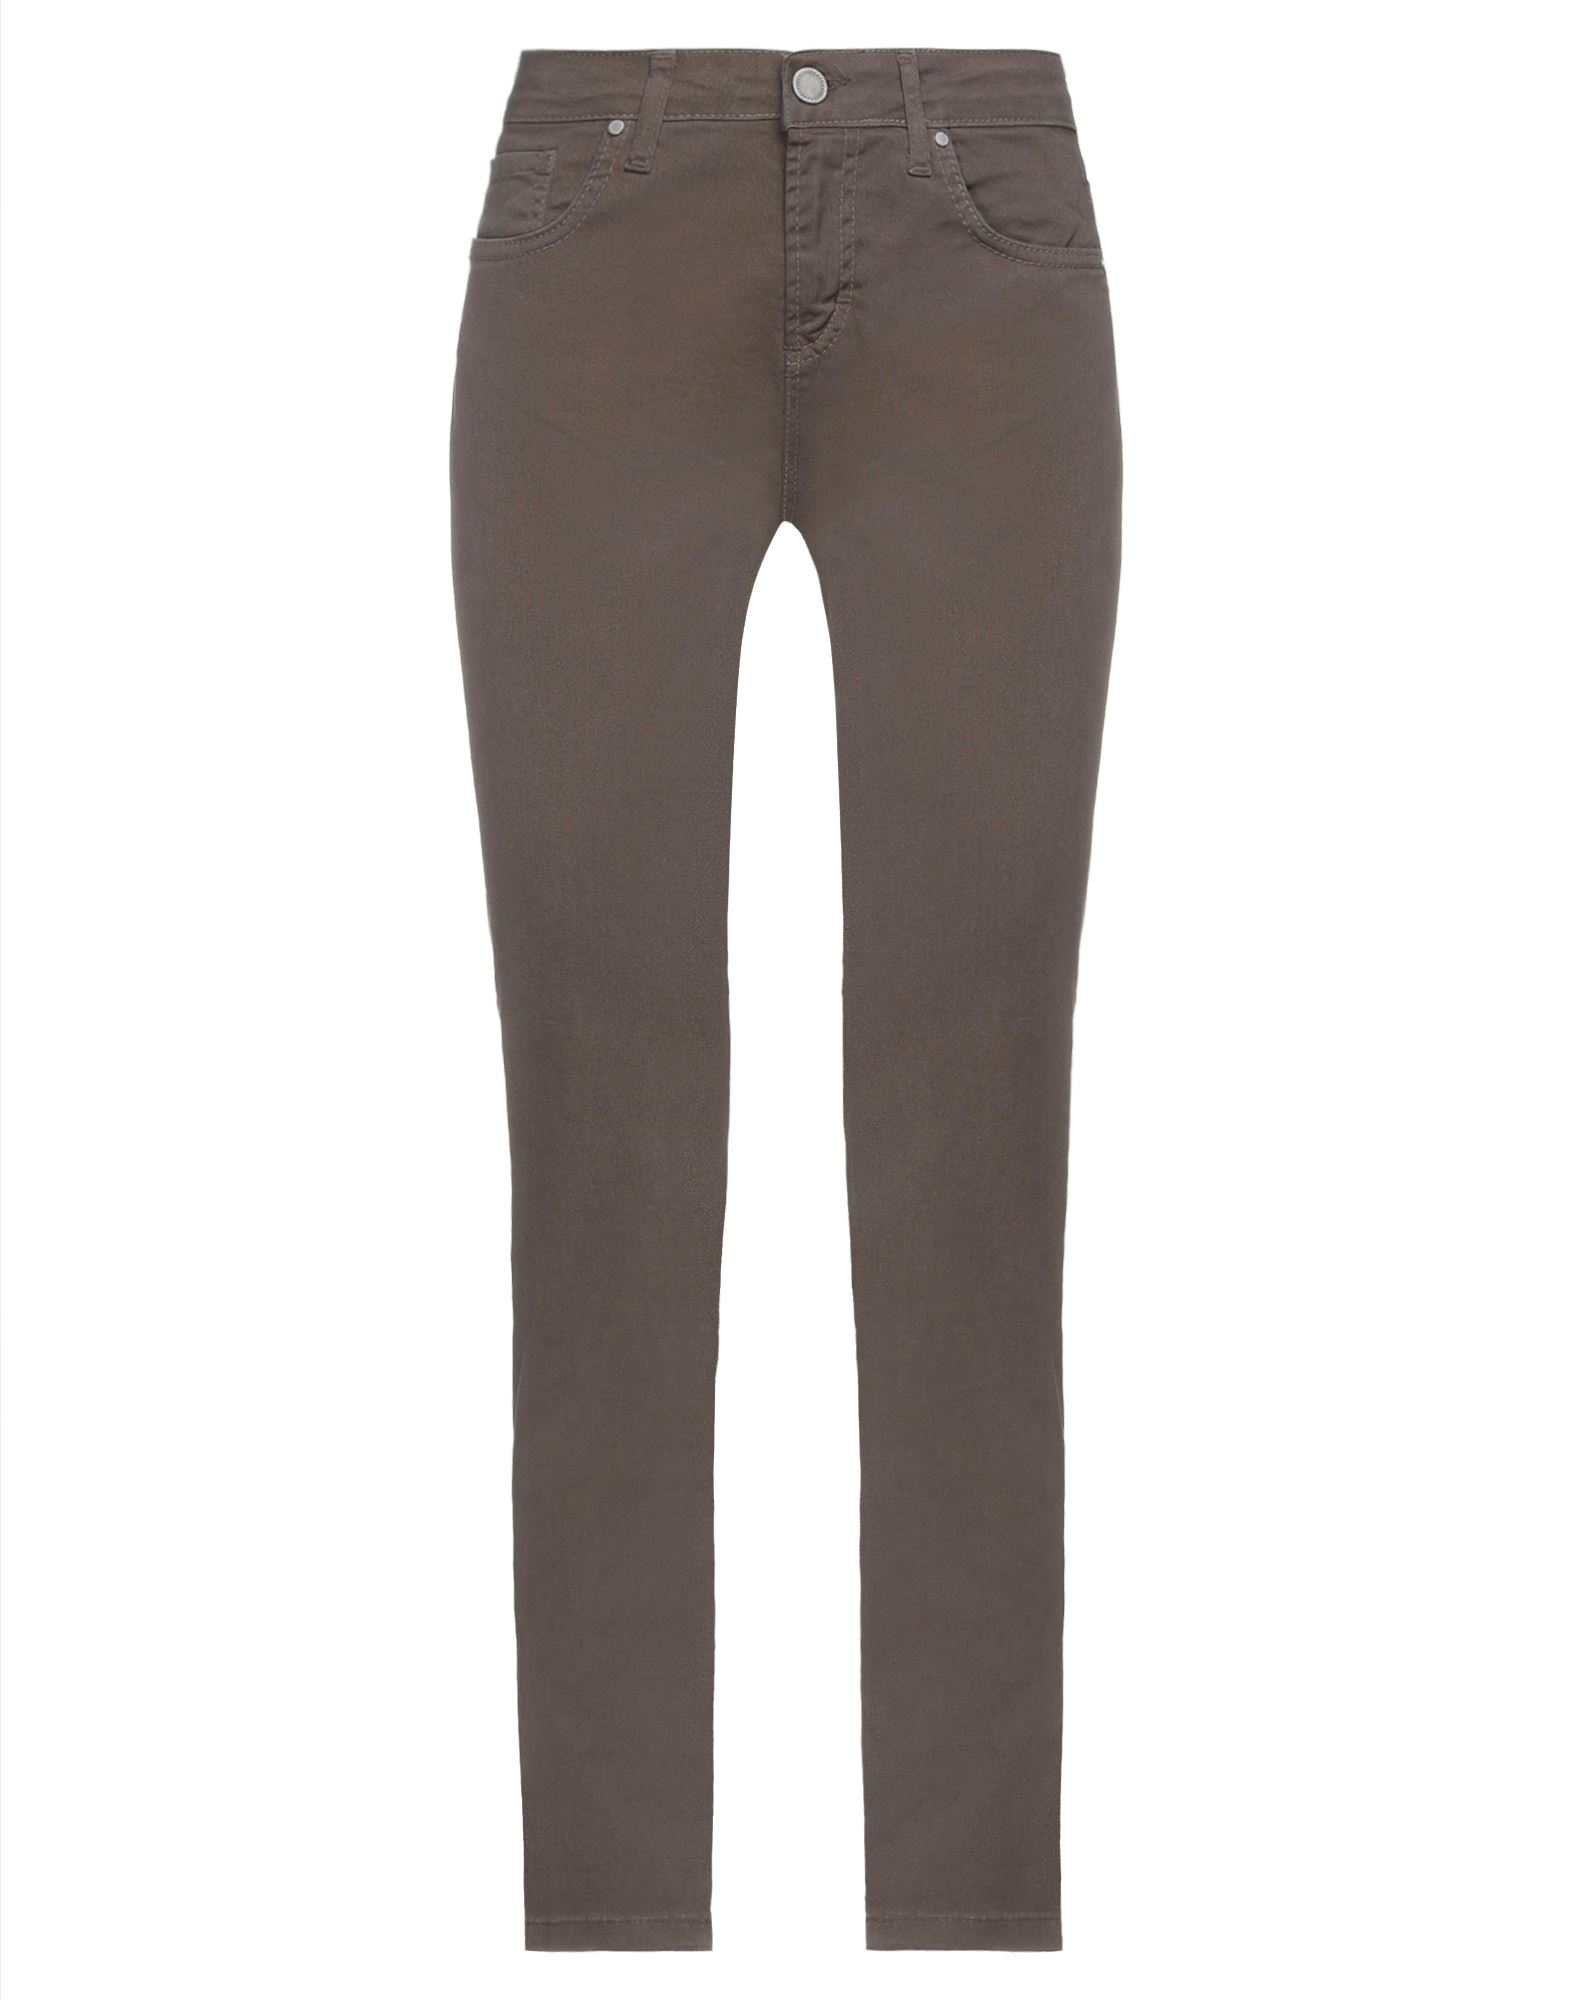 Frankie Morello Pants In Brown